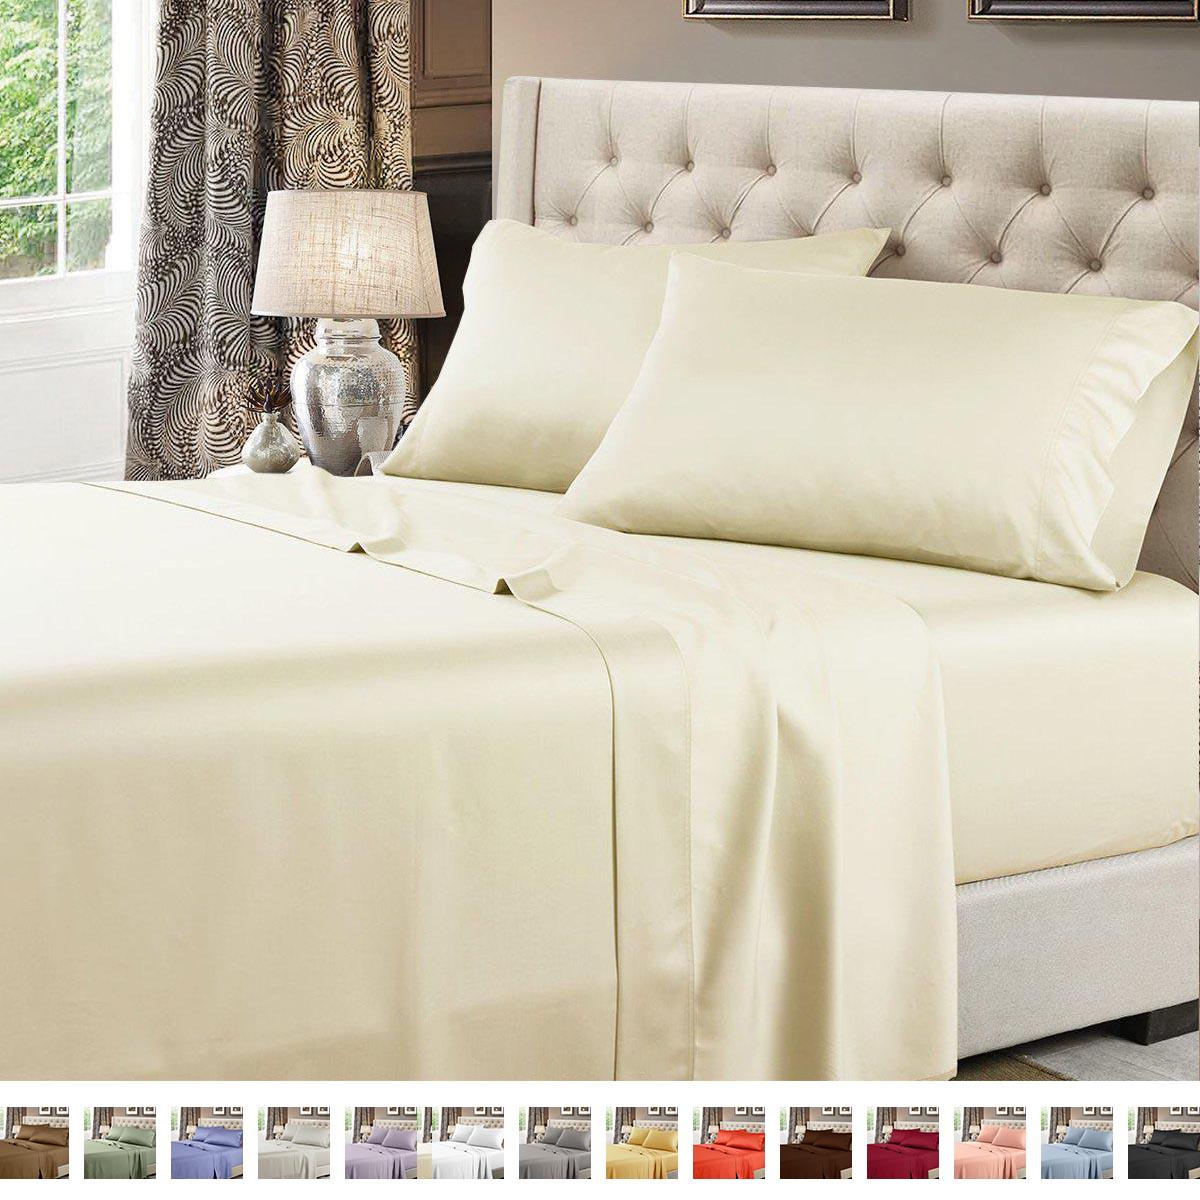 Egyptian Linens Sheets 600 Count